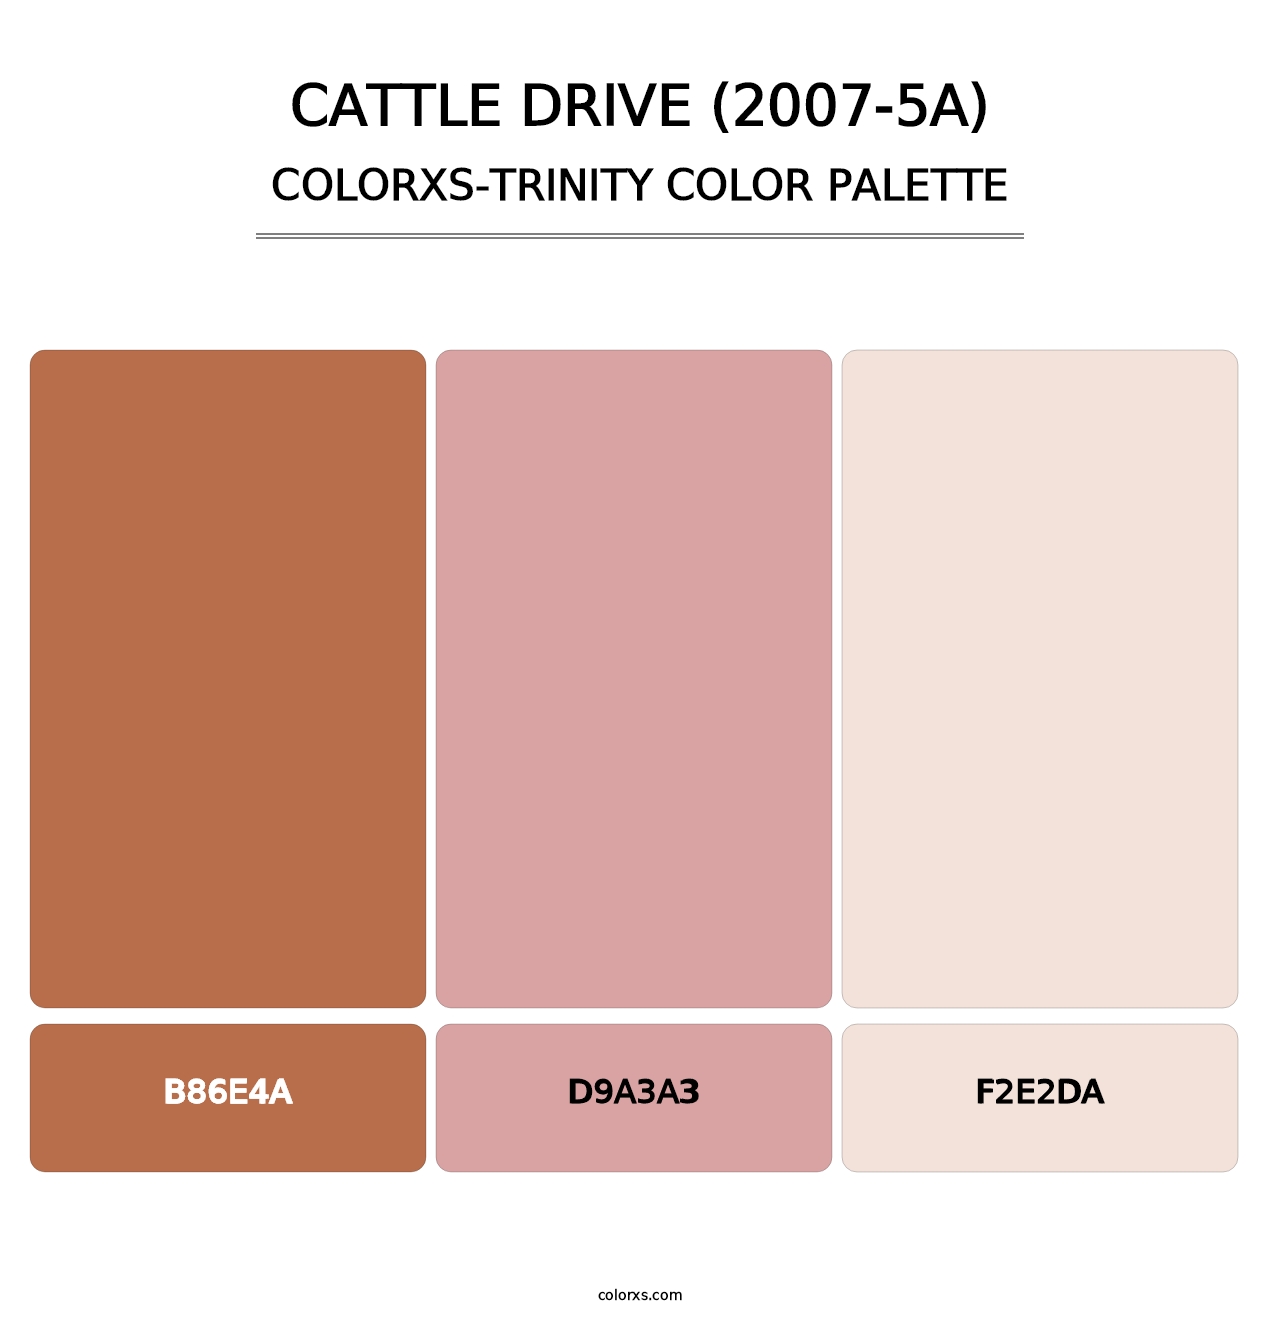 Cattle Drive (2007-5A) - Colorxs Trinity Palette